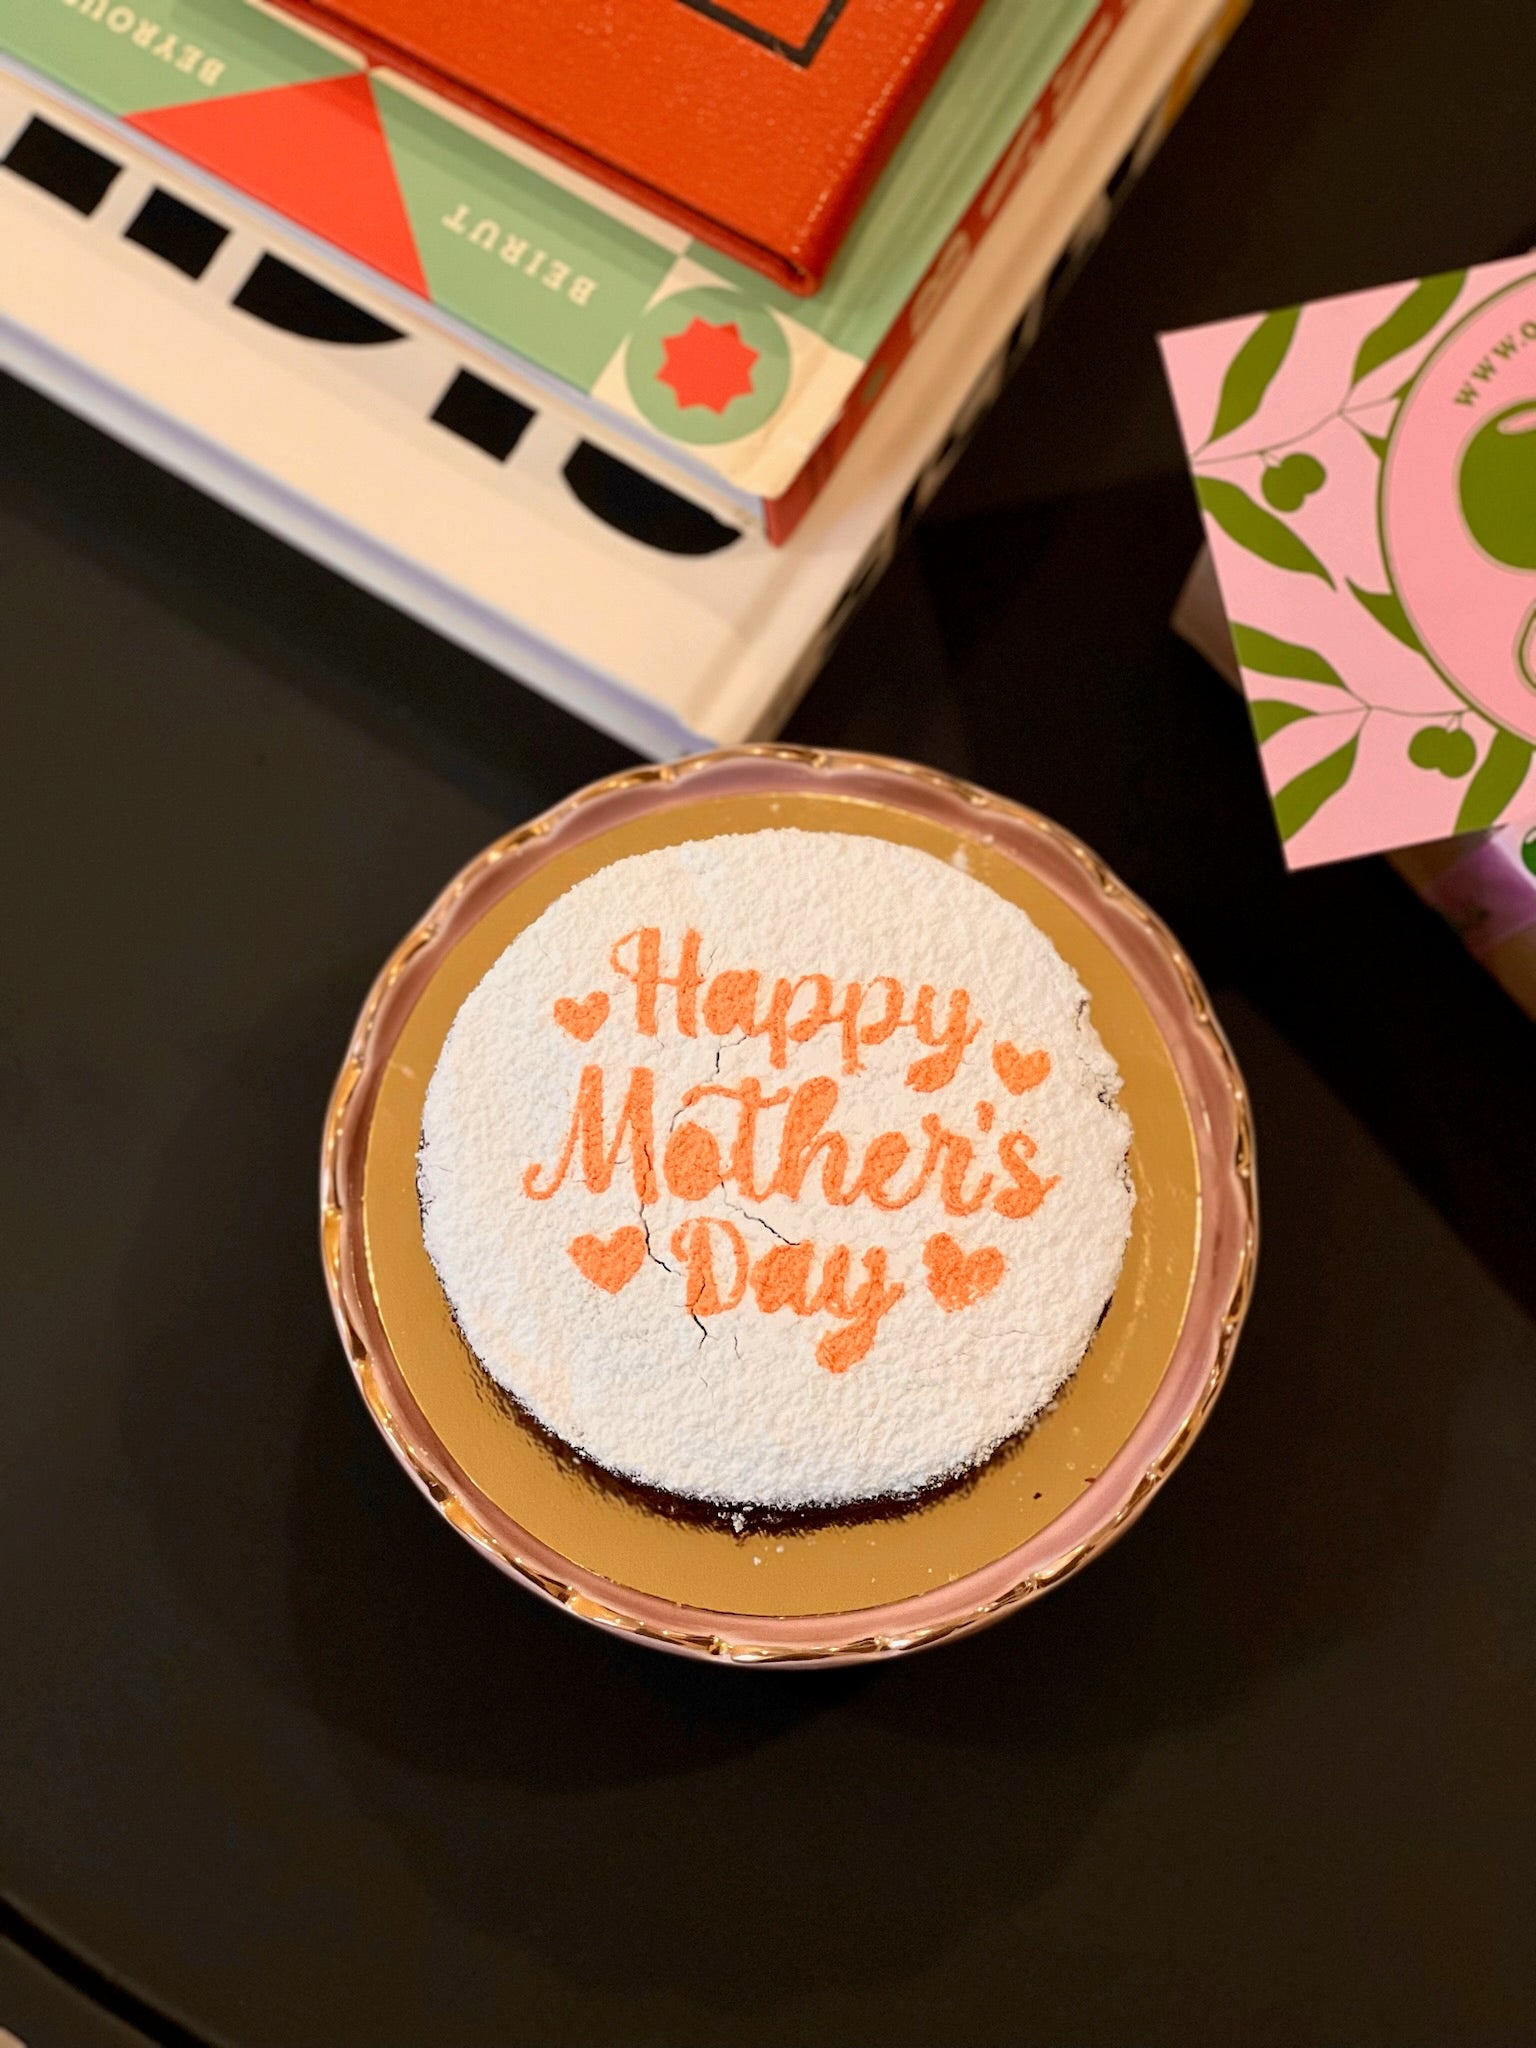 Mini 5" Mother's Day Cake